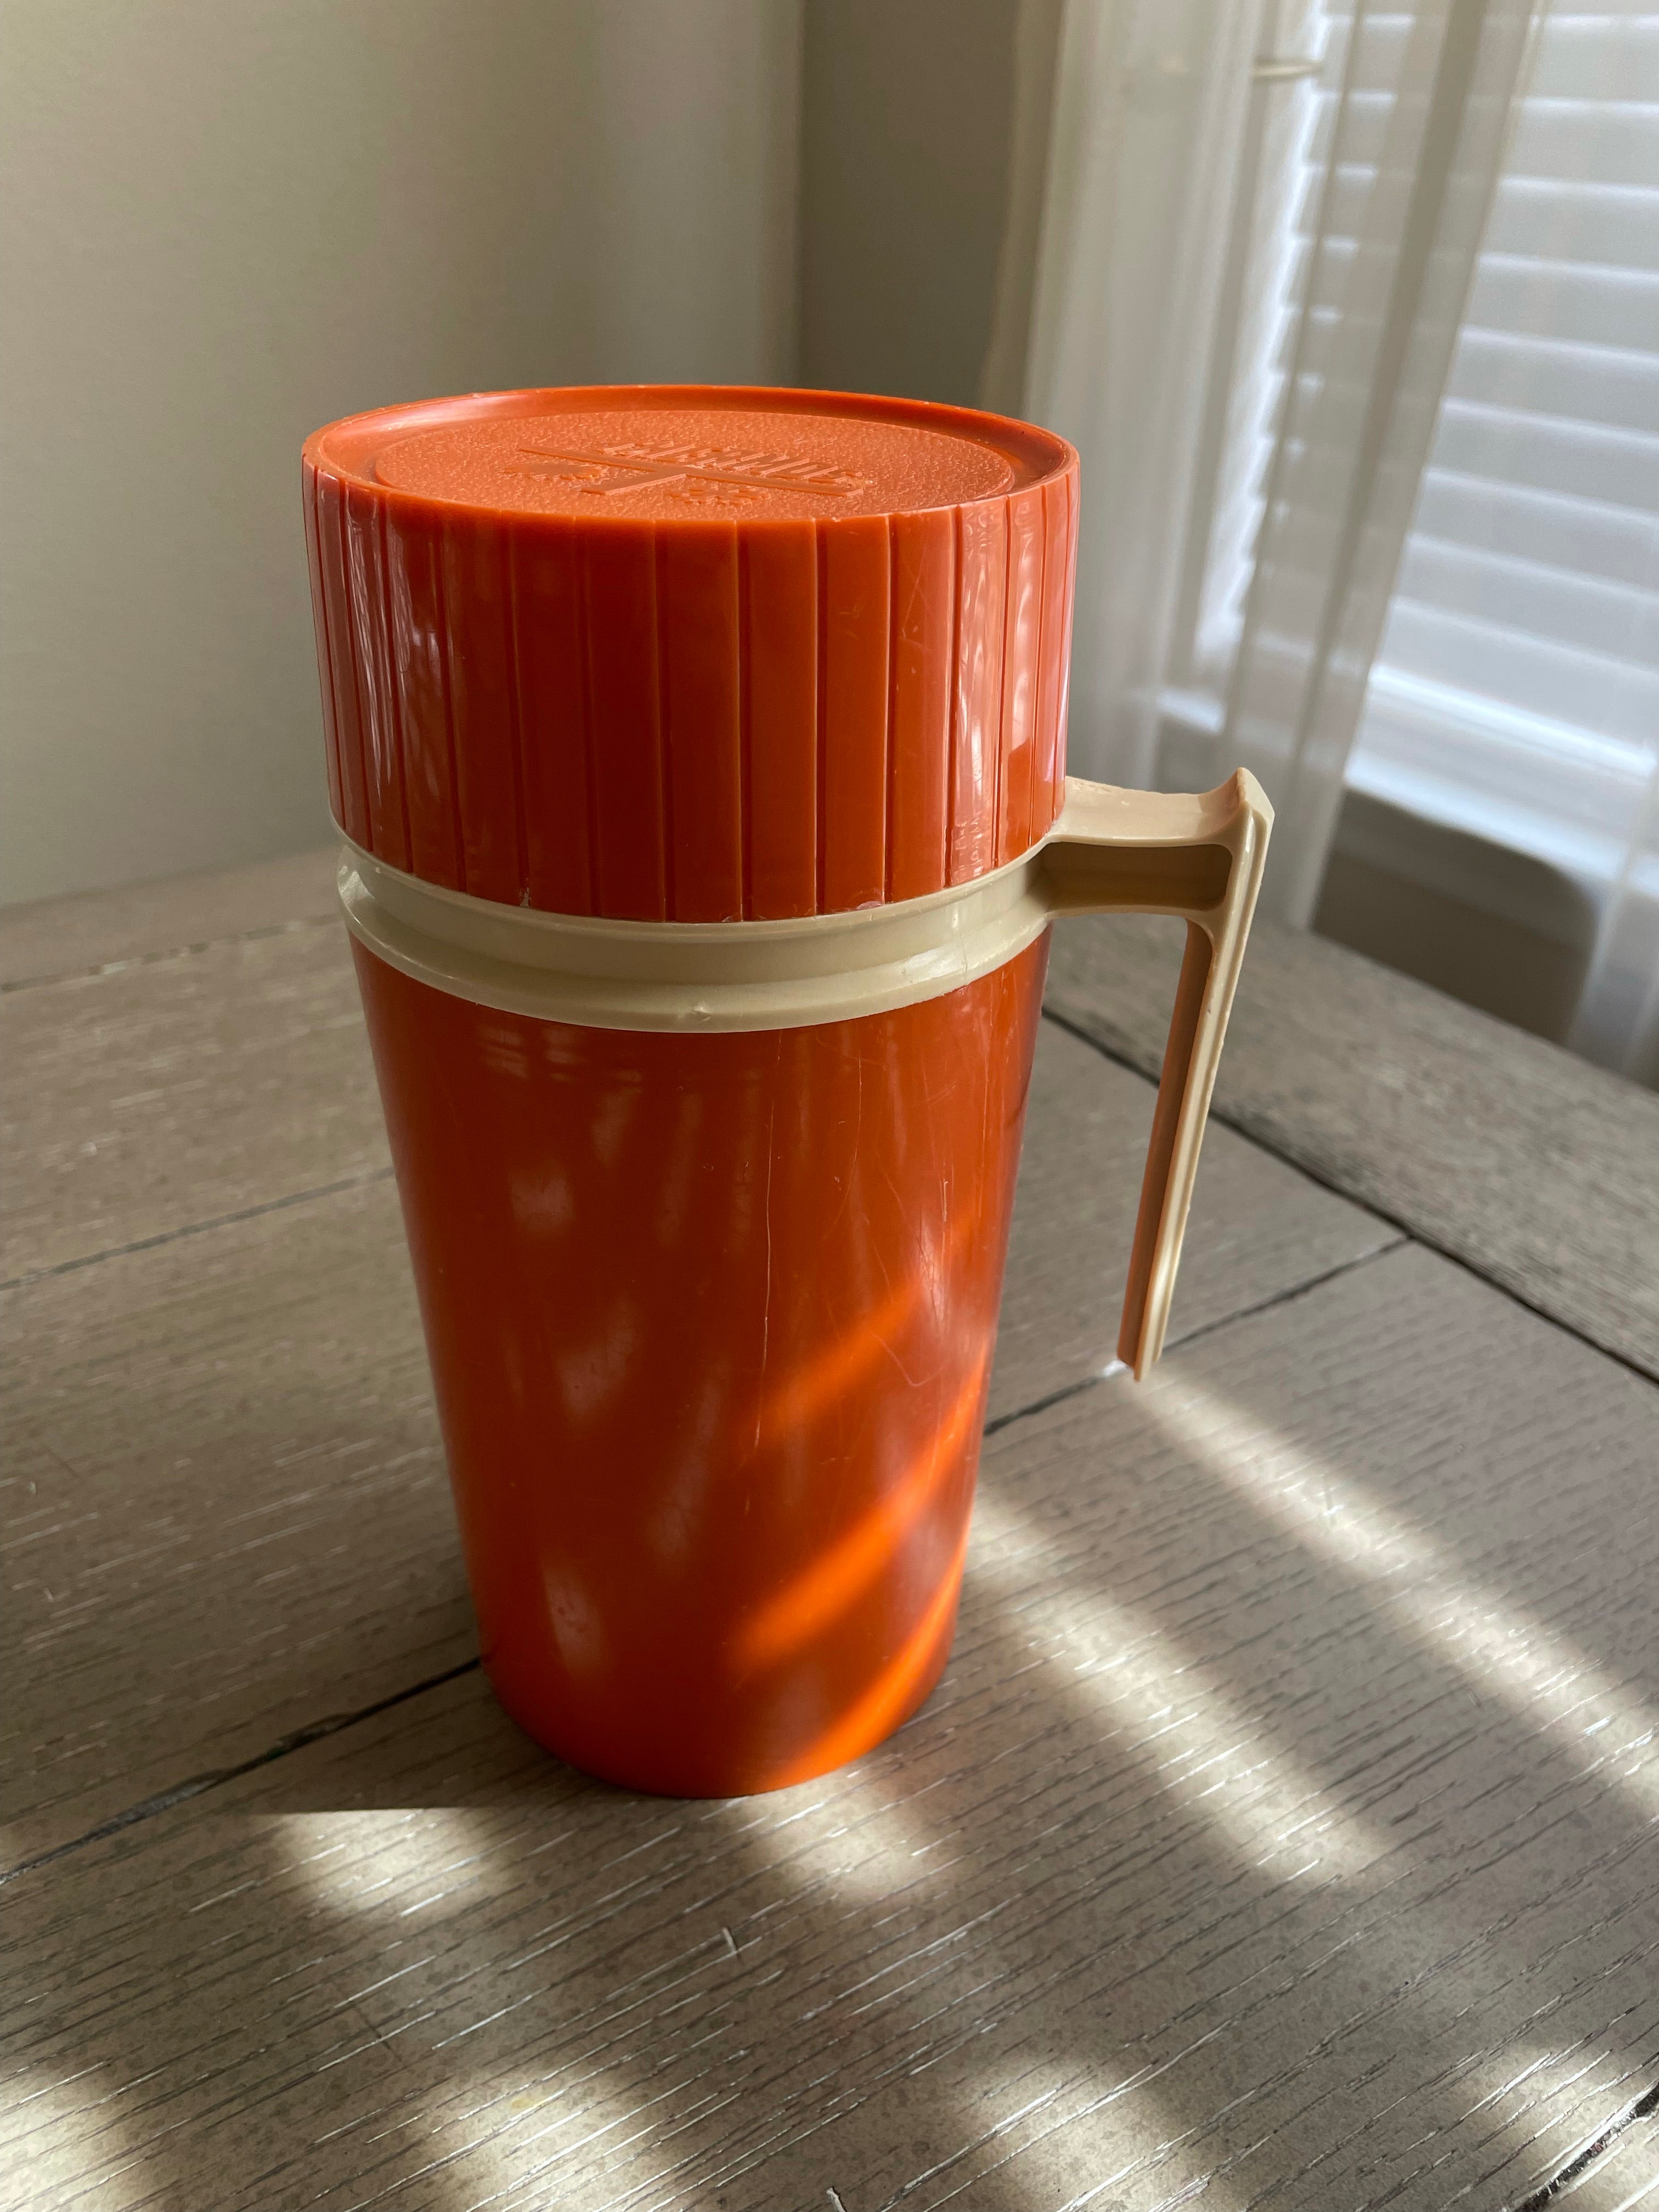 VINTAGE Thermos Orange Model 7202 Wide Mouth Glass Lined with Insert Pint